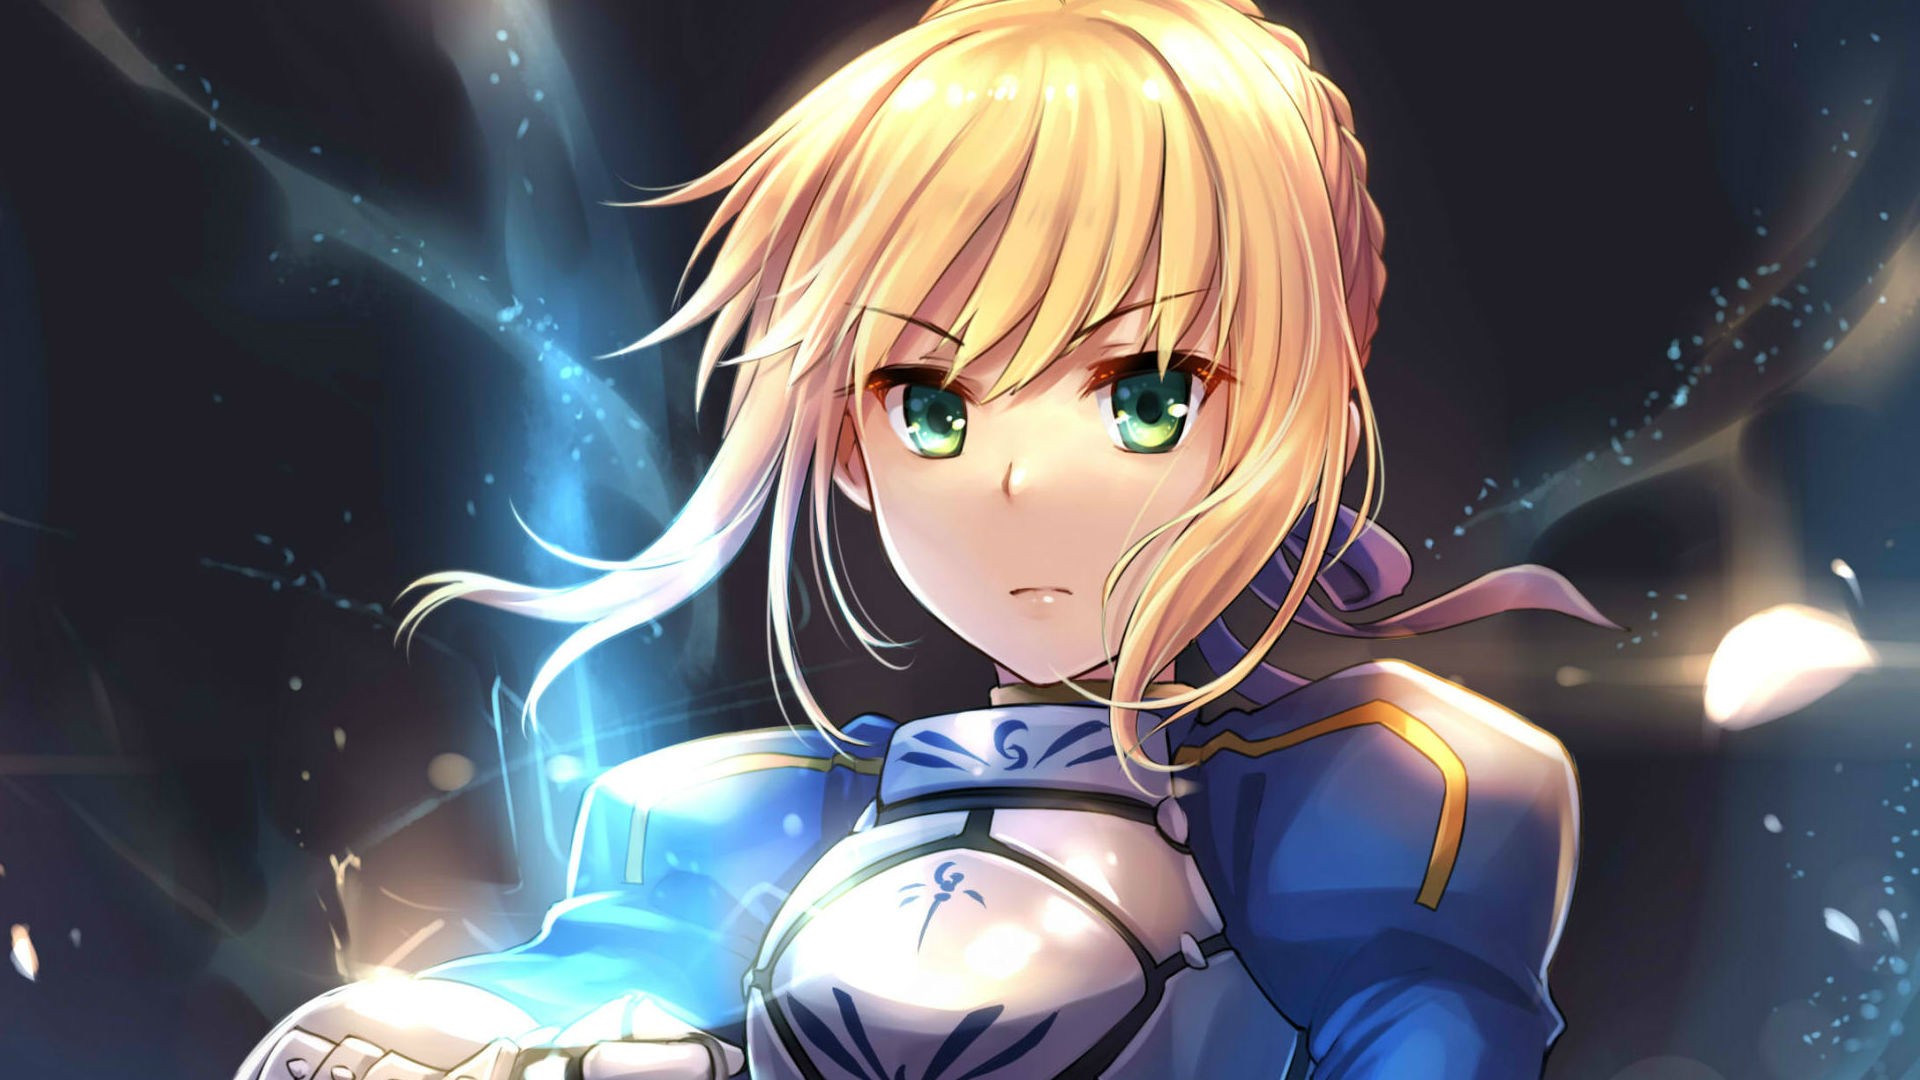 Fate Zero Girl Face Wallpaper Hd Anime 4k Wallpapers Images Photos And Background Wallpapers Den